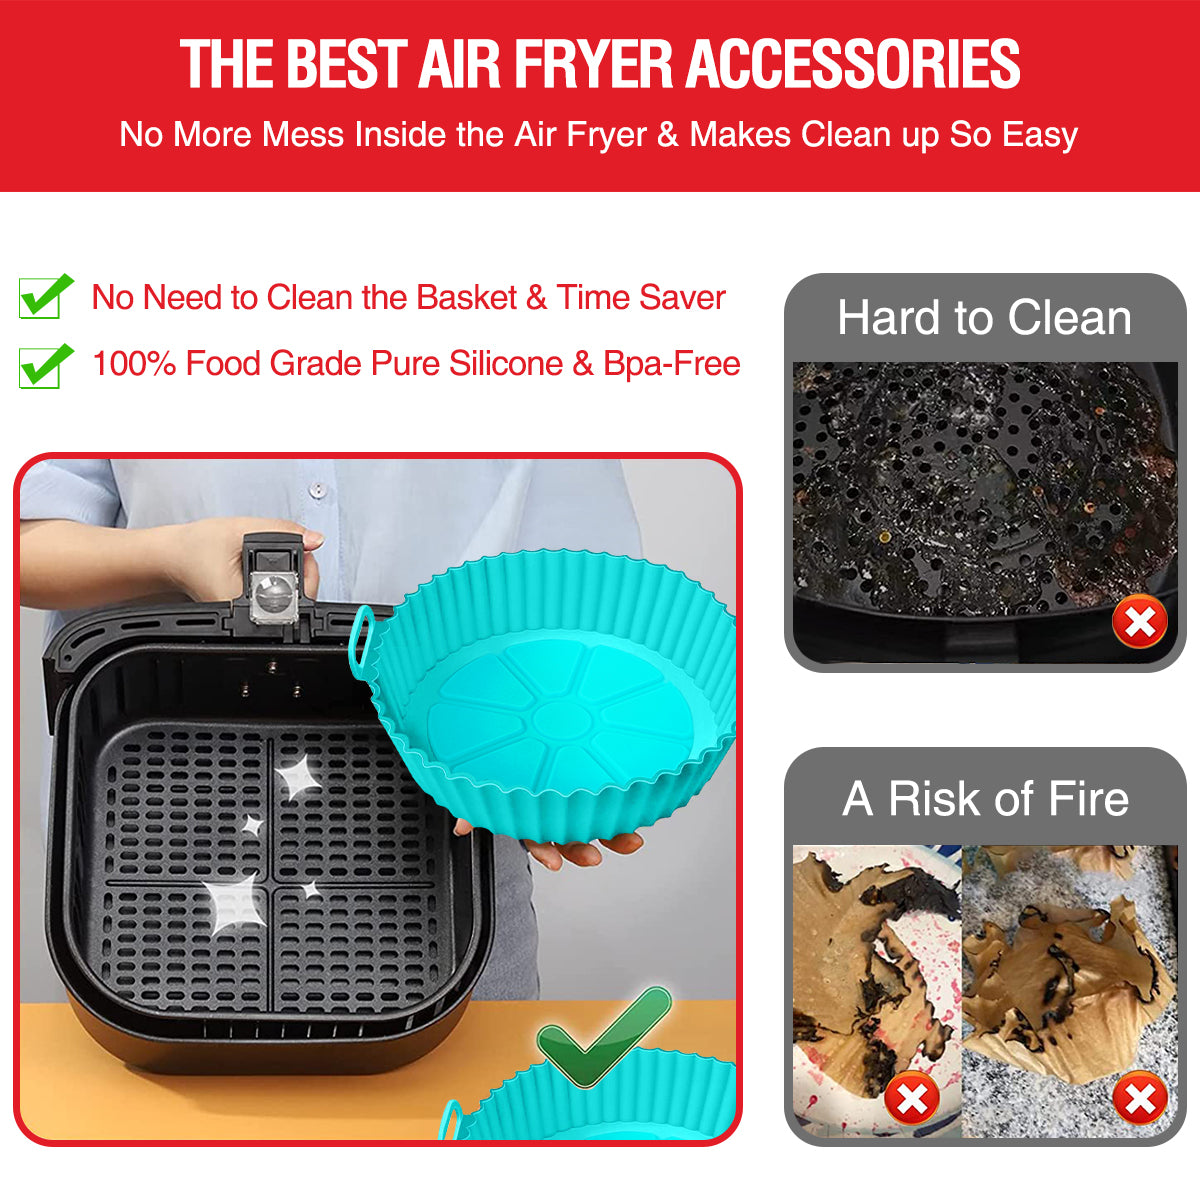 Silicone Air Fryer Liner Reusable Air Fryer Silicone Basket Heat Resistant  Easy Cleaning Air fryers Silicone Pot for 4 to 7 Qt for Air fryer Oven